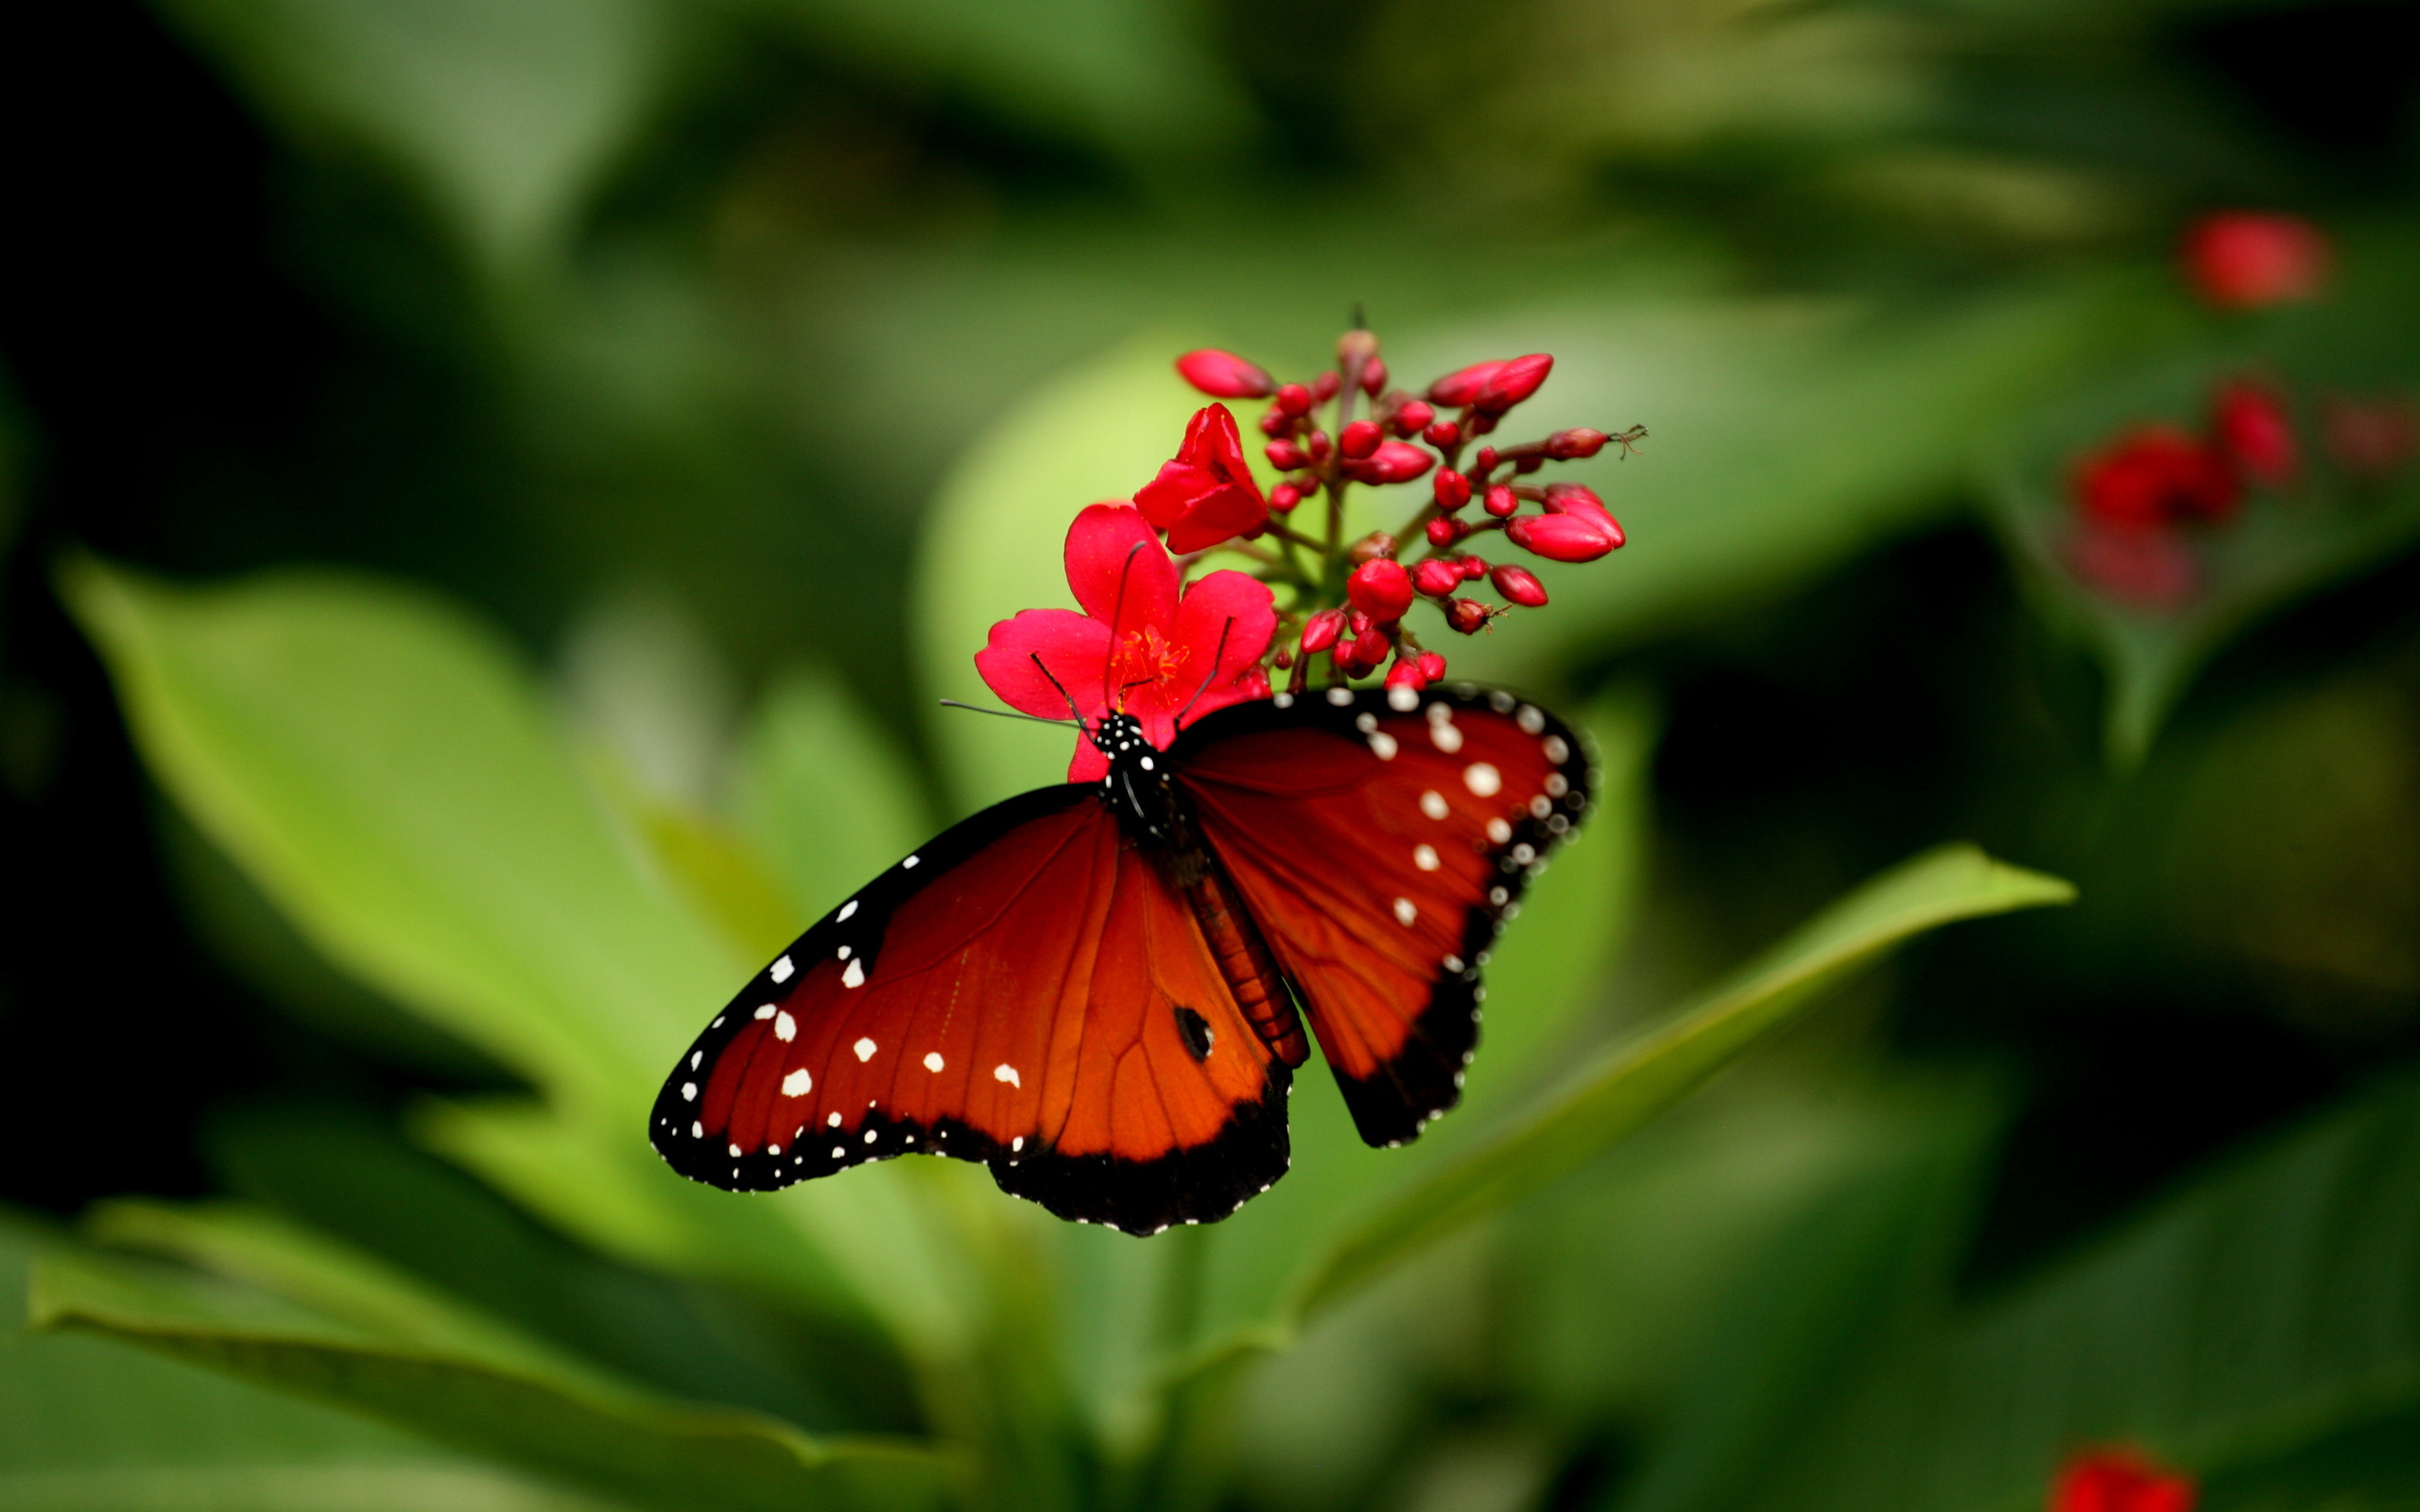 Beautiful Butterfly wallpapers55com   Best Wallpapers for PCs